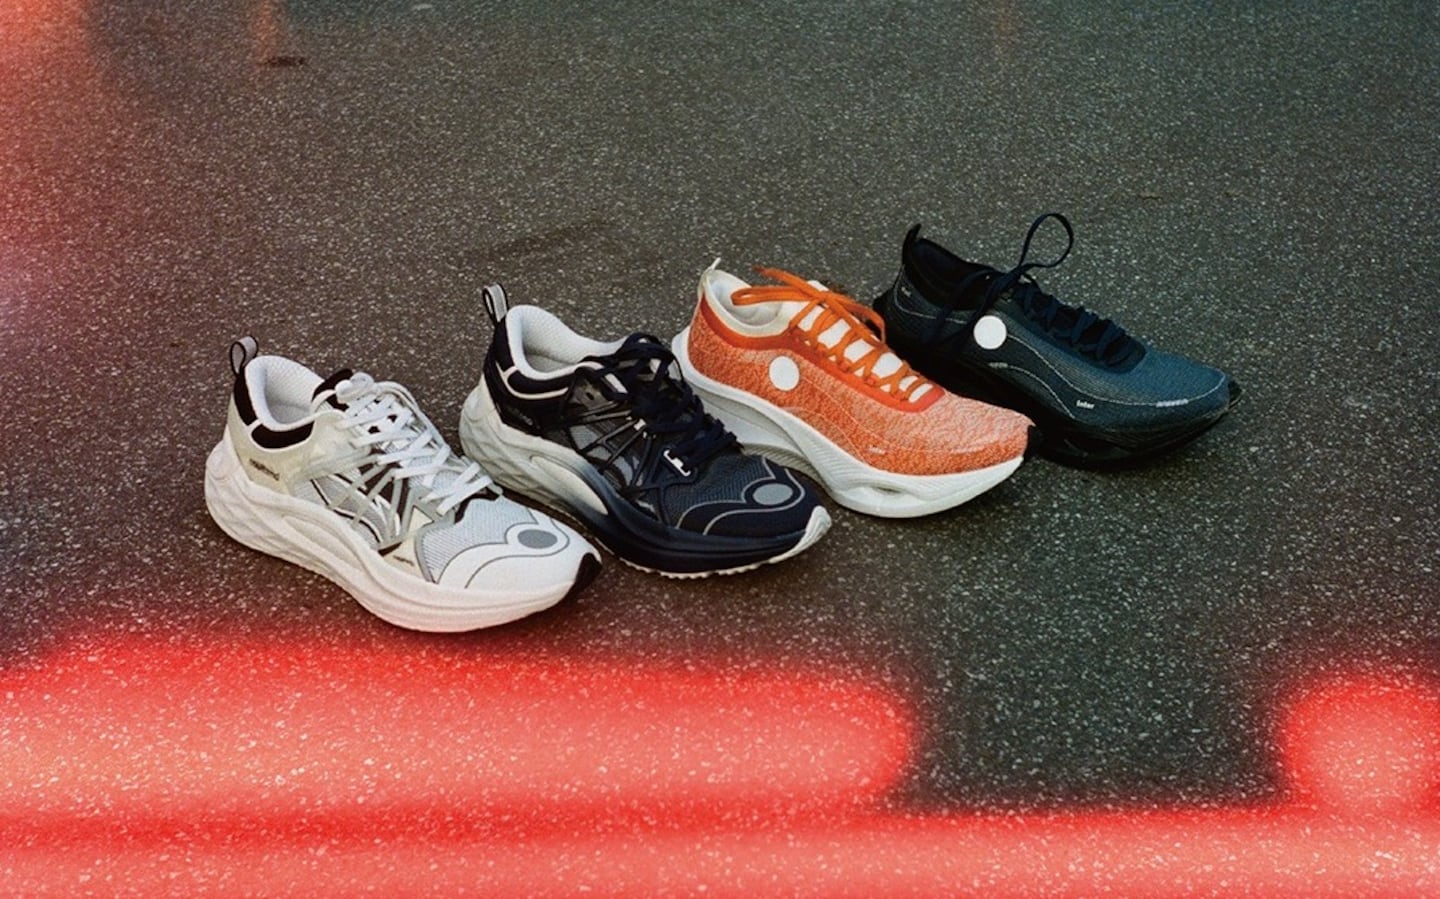 Four different models of shoes by Li-Ning.